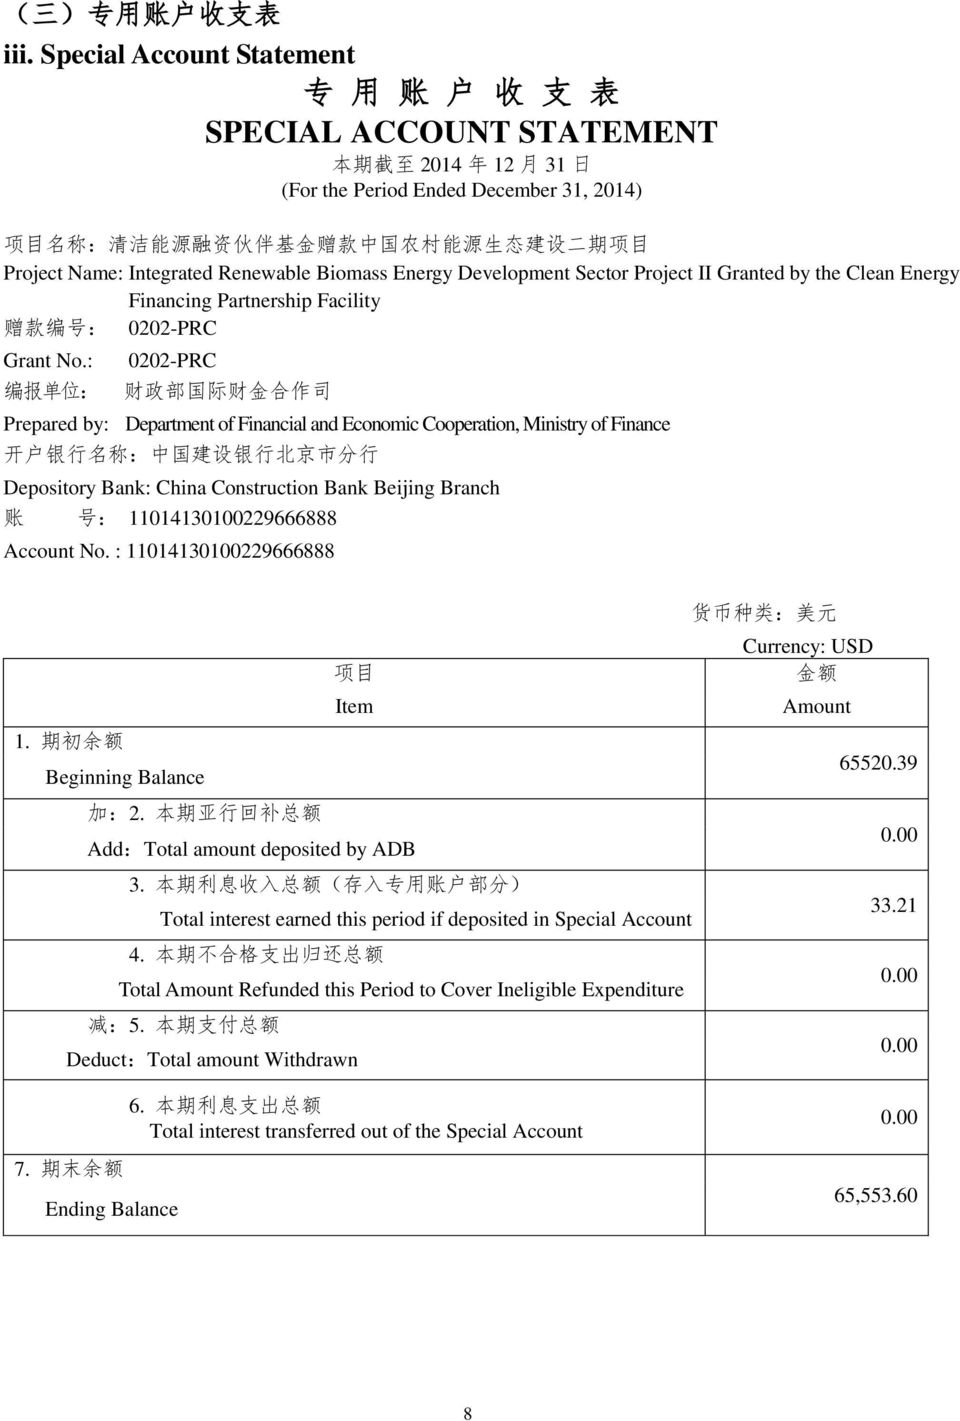 Project Name: Integrated Renewable Biomass Energy Development Sector Project II Granted by the Clean Energy Financing Partnership Facility 赠 款 编 号 : 0202-PRC Grant No.